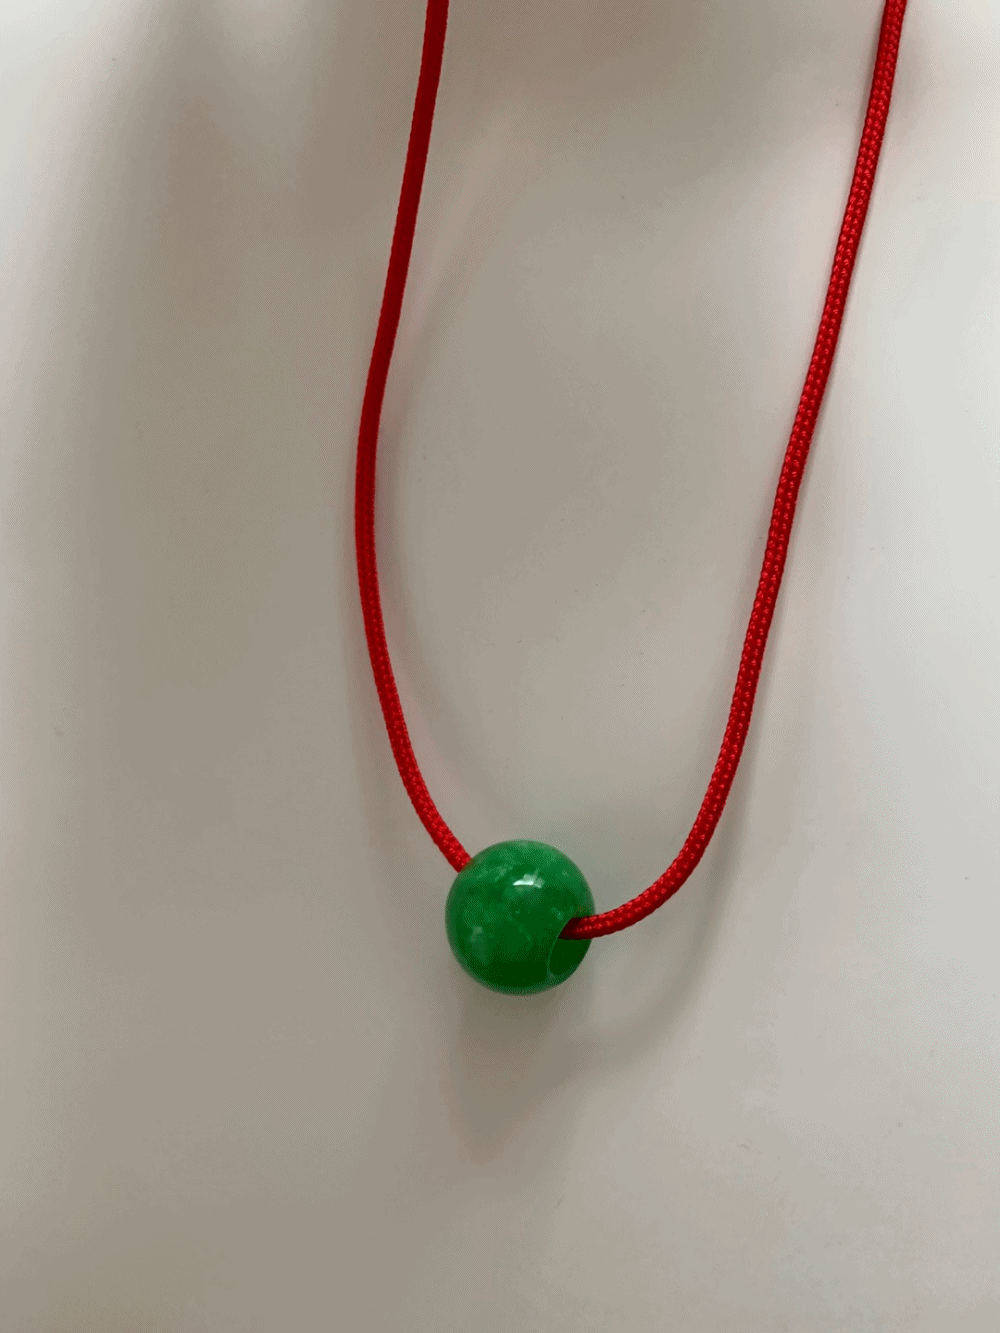 [Acc] Watermelon beads necklace / one color